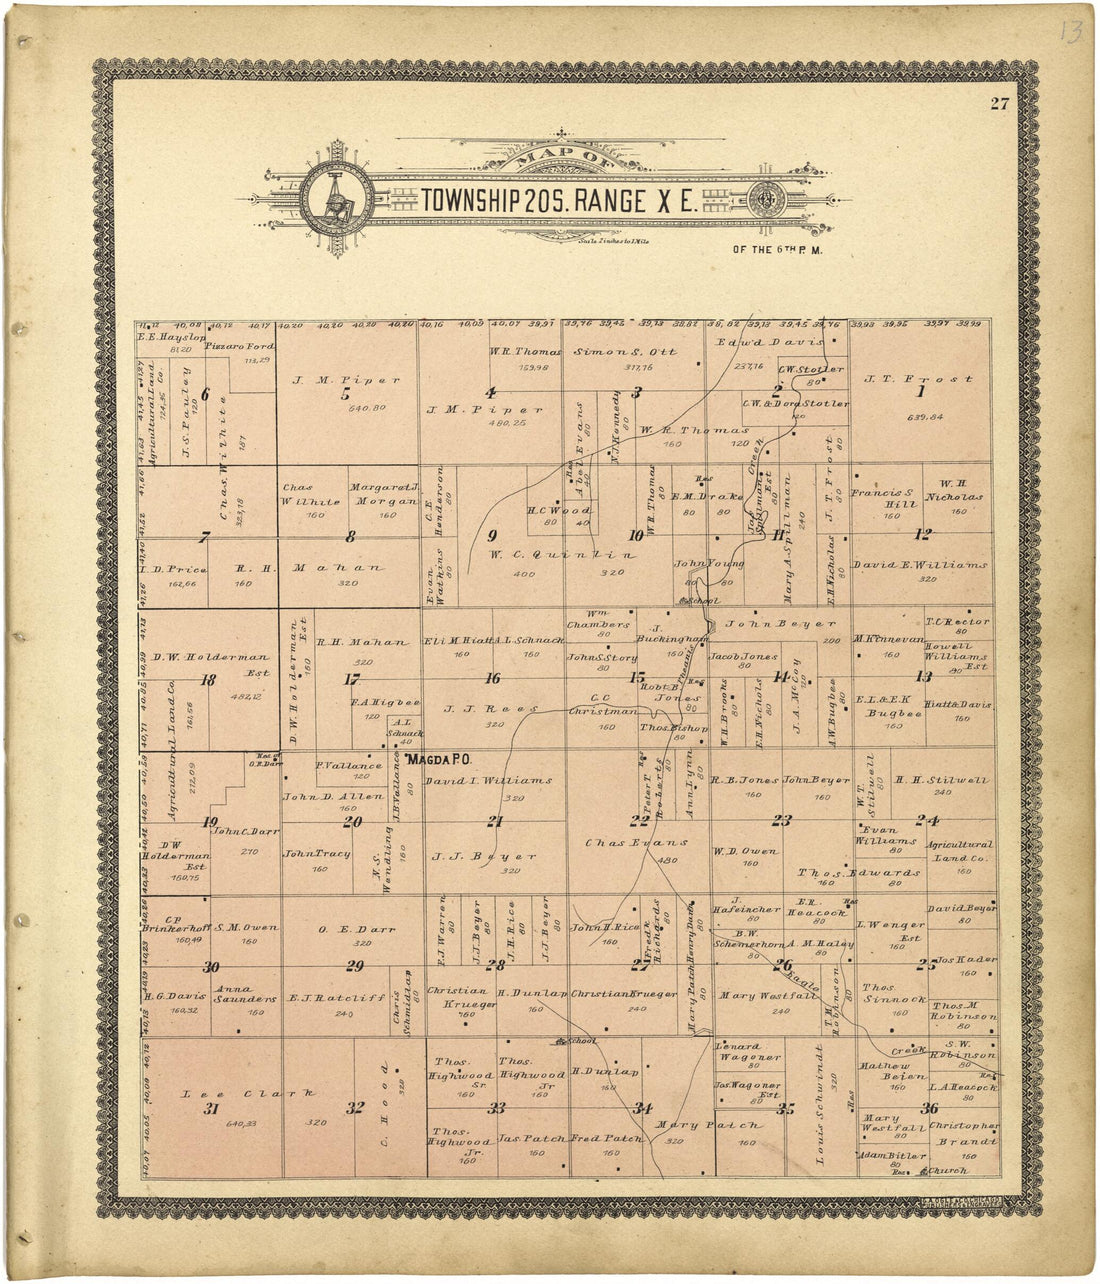 This old map of Map of Township 20 S. Range X E. from Standard Atlas of Lyon County, Kansas from 1901 was created by  Geo. A. Ogle &amp; Co in 1901